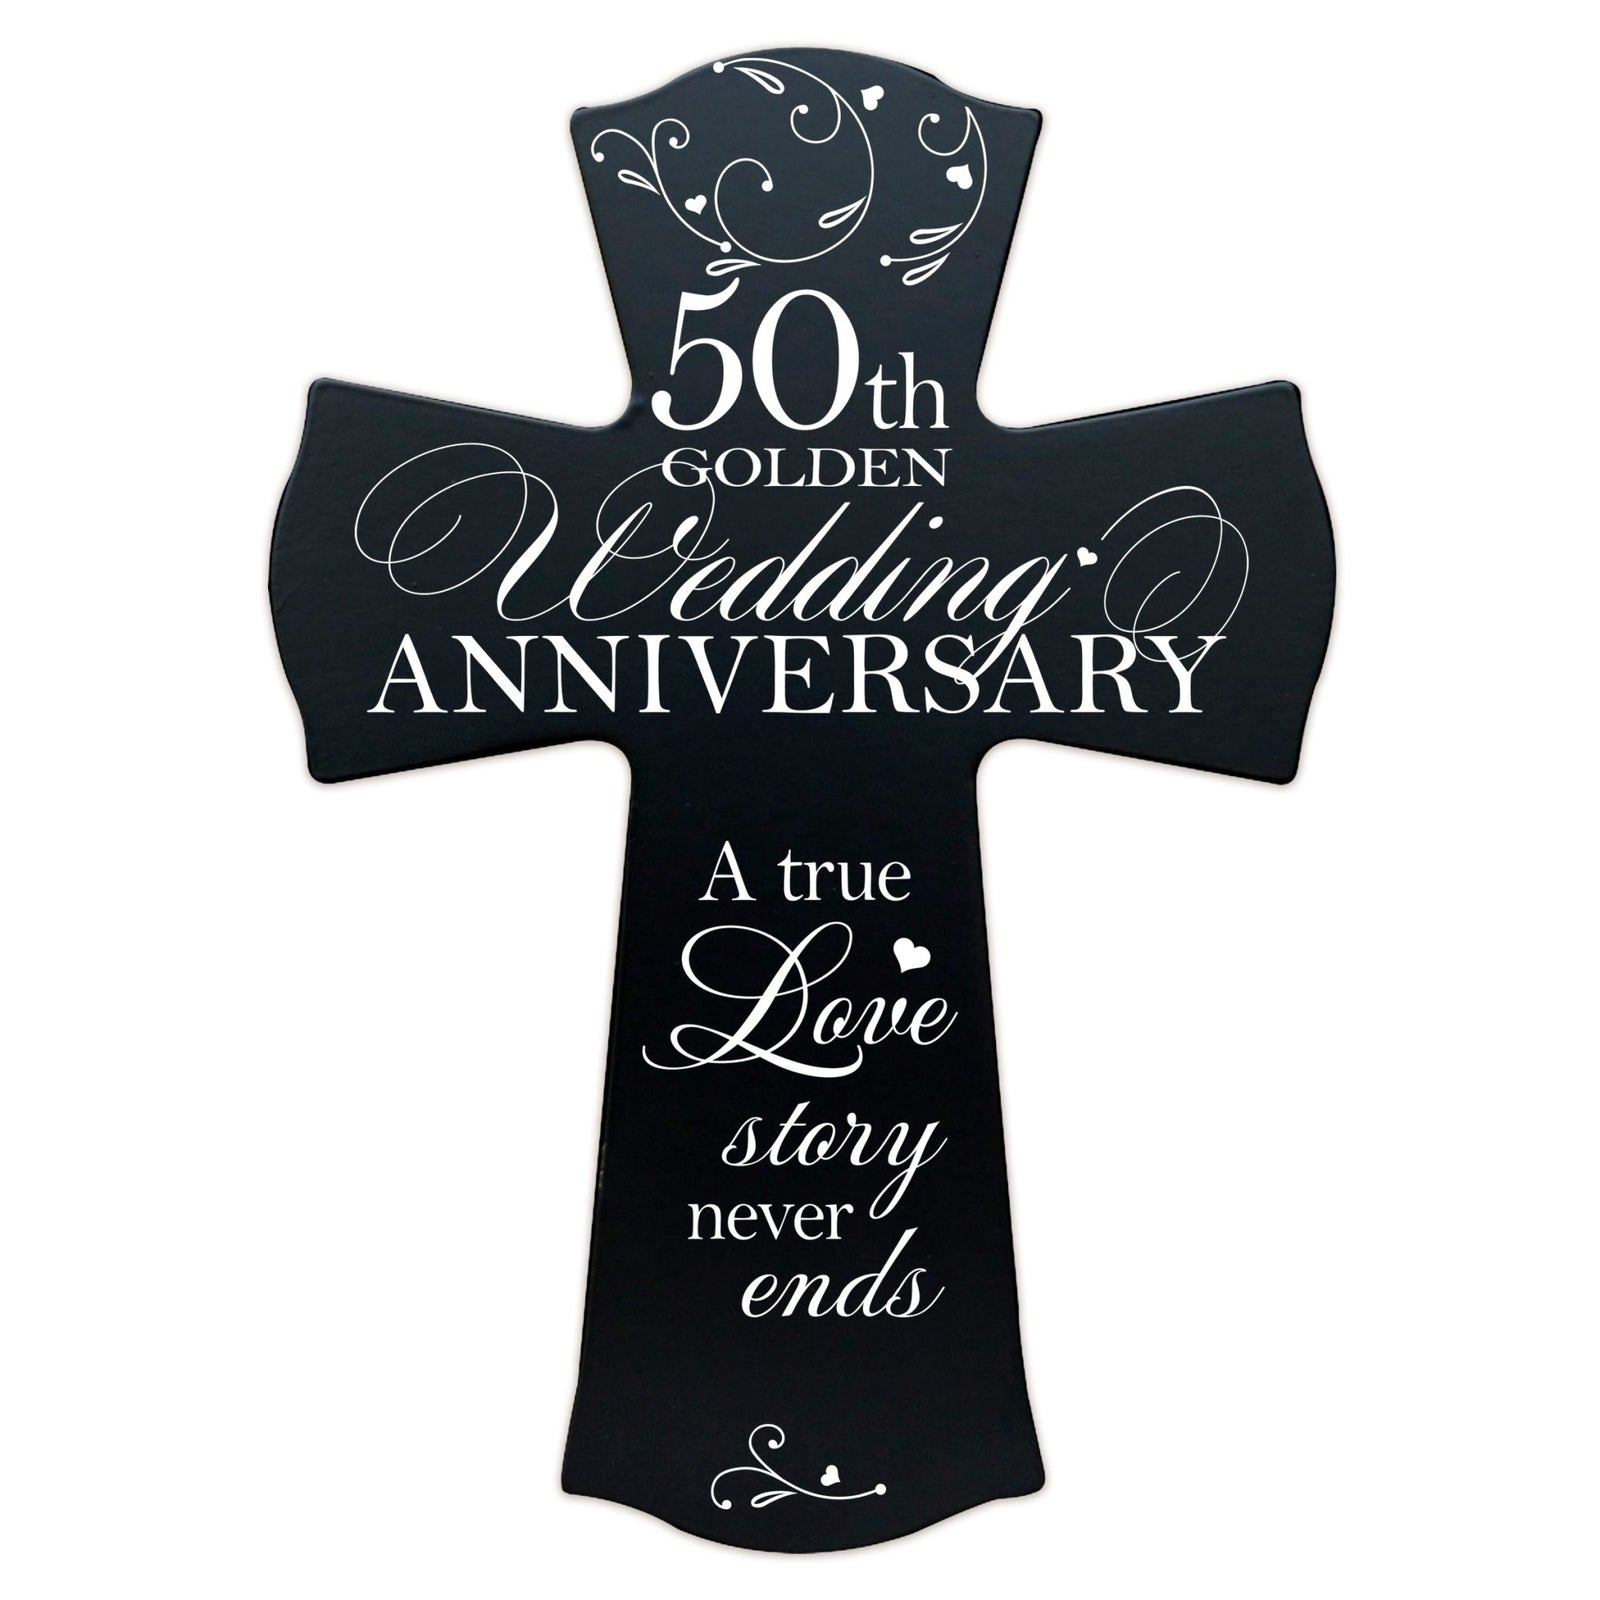 50th Wedding Anniversary Celebration Vintage-Inspired Wooden Wall Cross - A True Love Story Never Ends